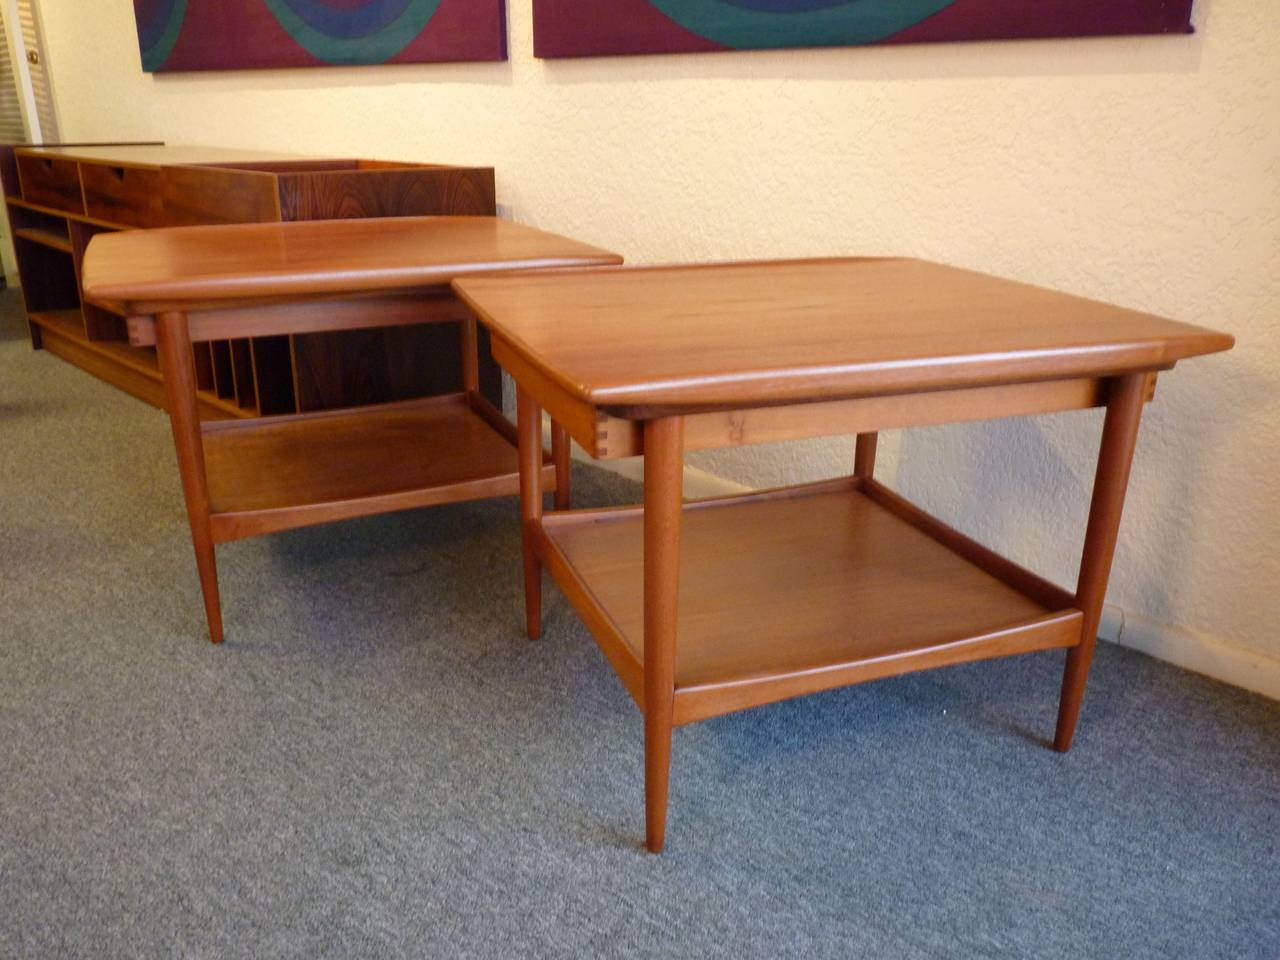 Pair of Danish modern side tables by Moreddi with drawers that slide toward front or rear. Excellent quality craftsmanship displayed in sculpted edge and dovetail drawer. Pair is in excellent condition with lacquer finish.